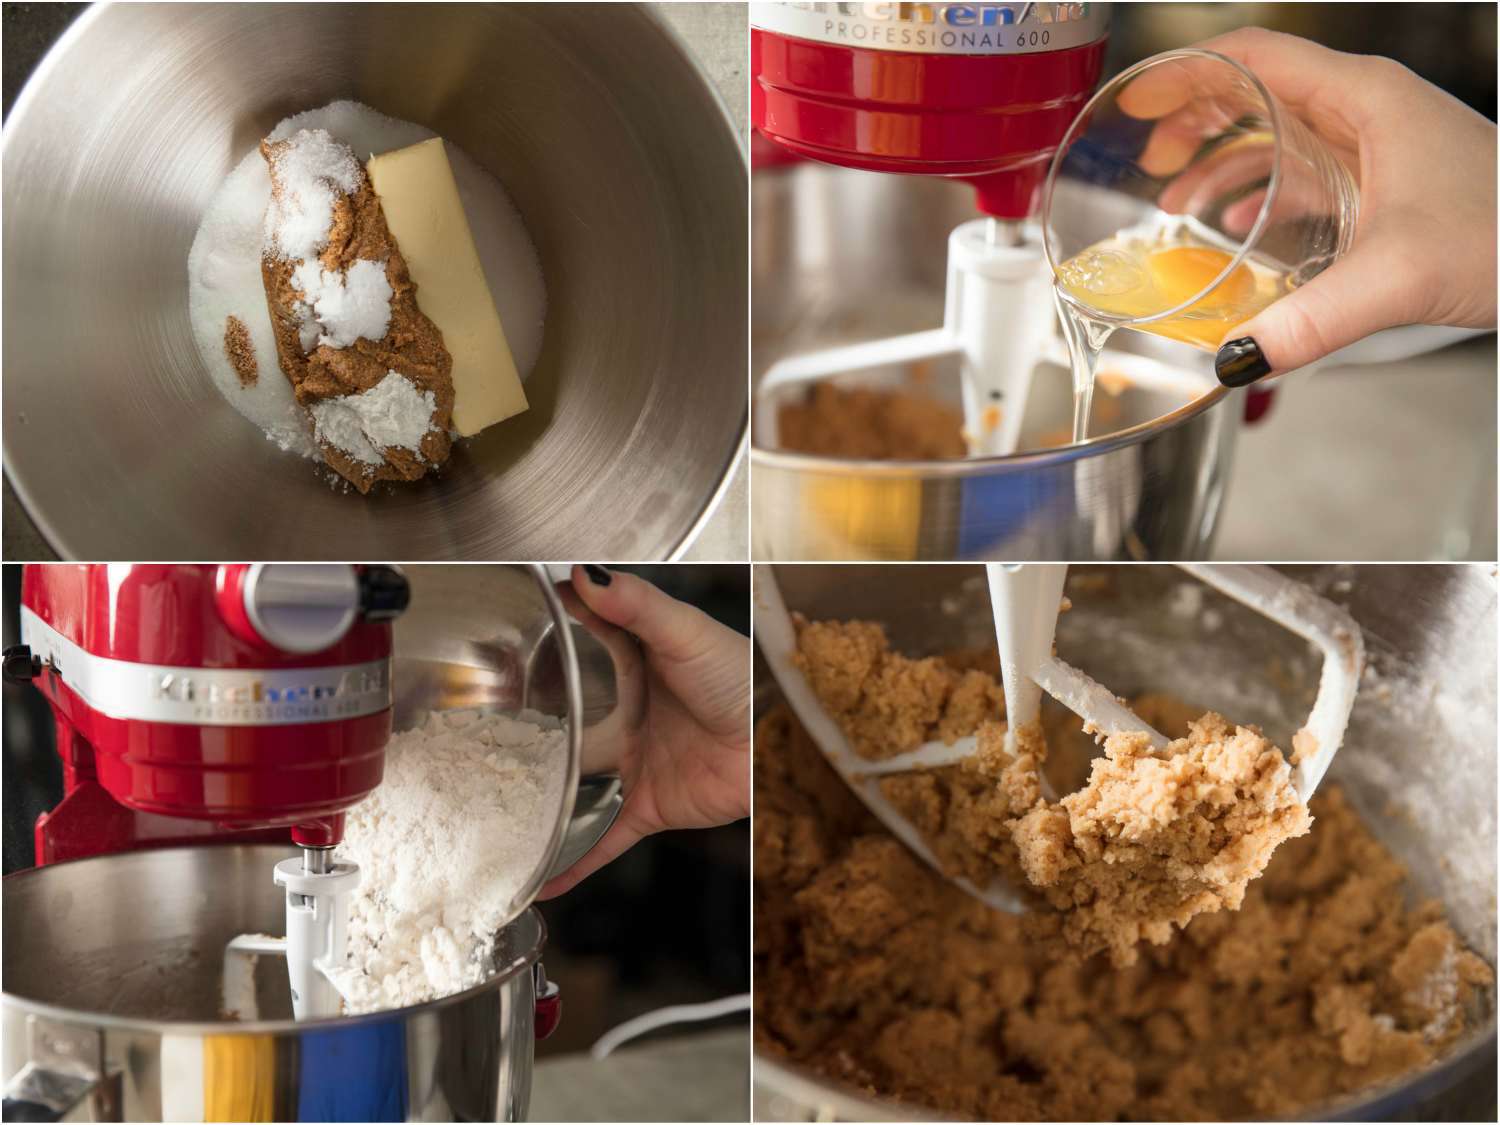 Composite of combining butter, hazelnut butter, and sugar, adding egg and flour, and mixing until a dough forms.